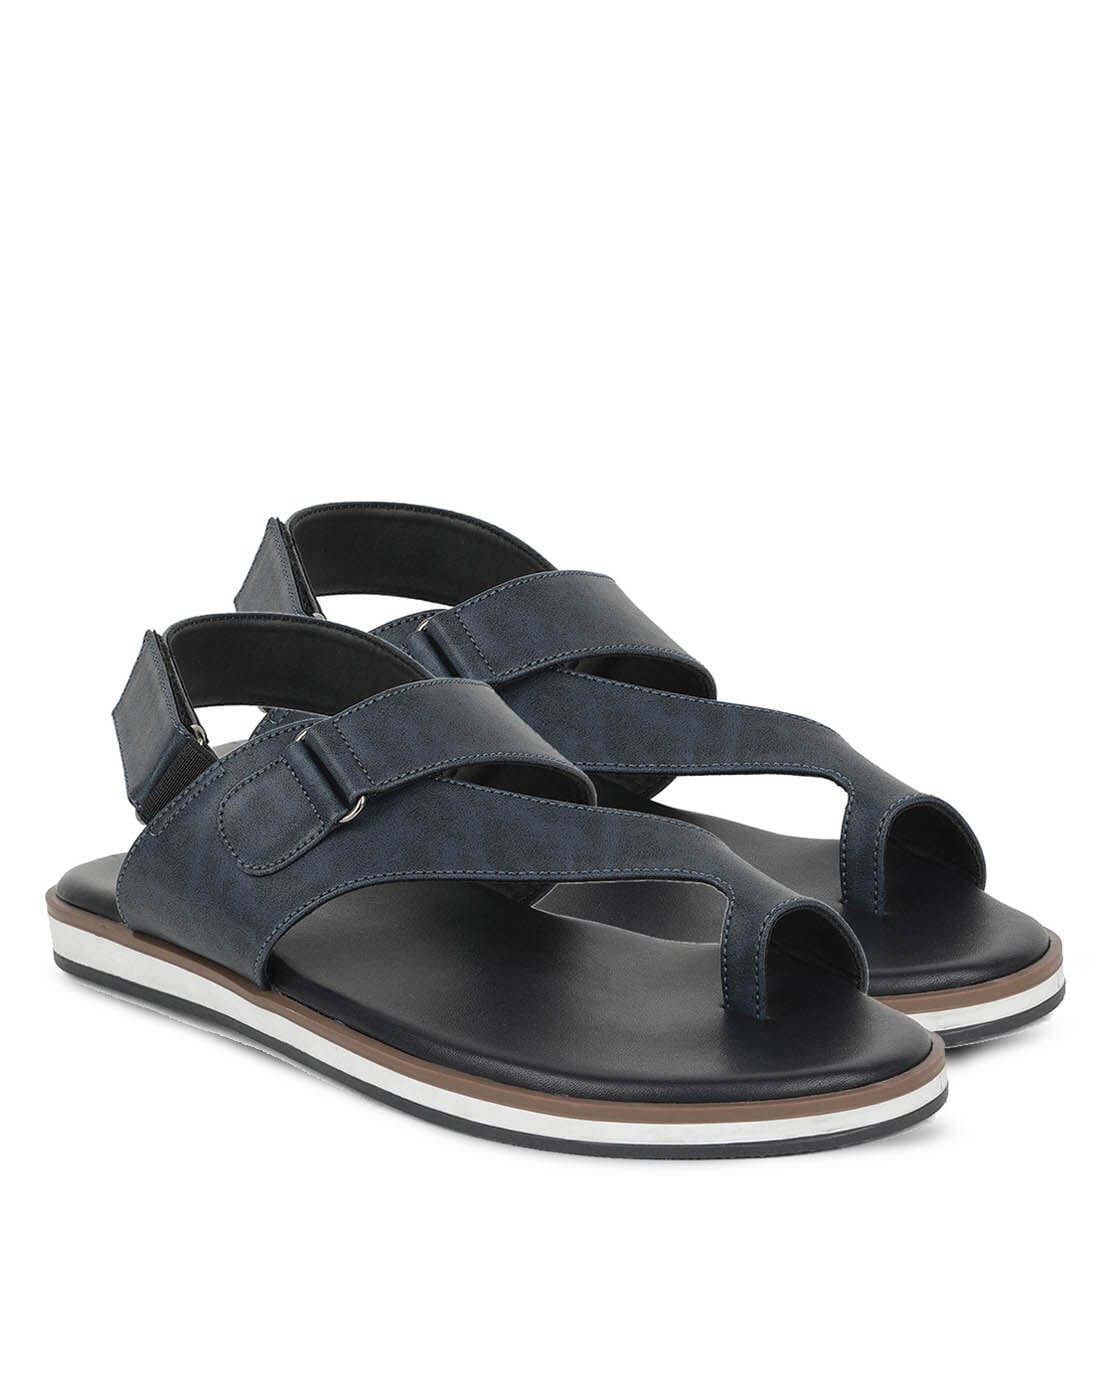 2021 Lowest Price Bata Men Black Flats Sandal Price in India   Specifications